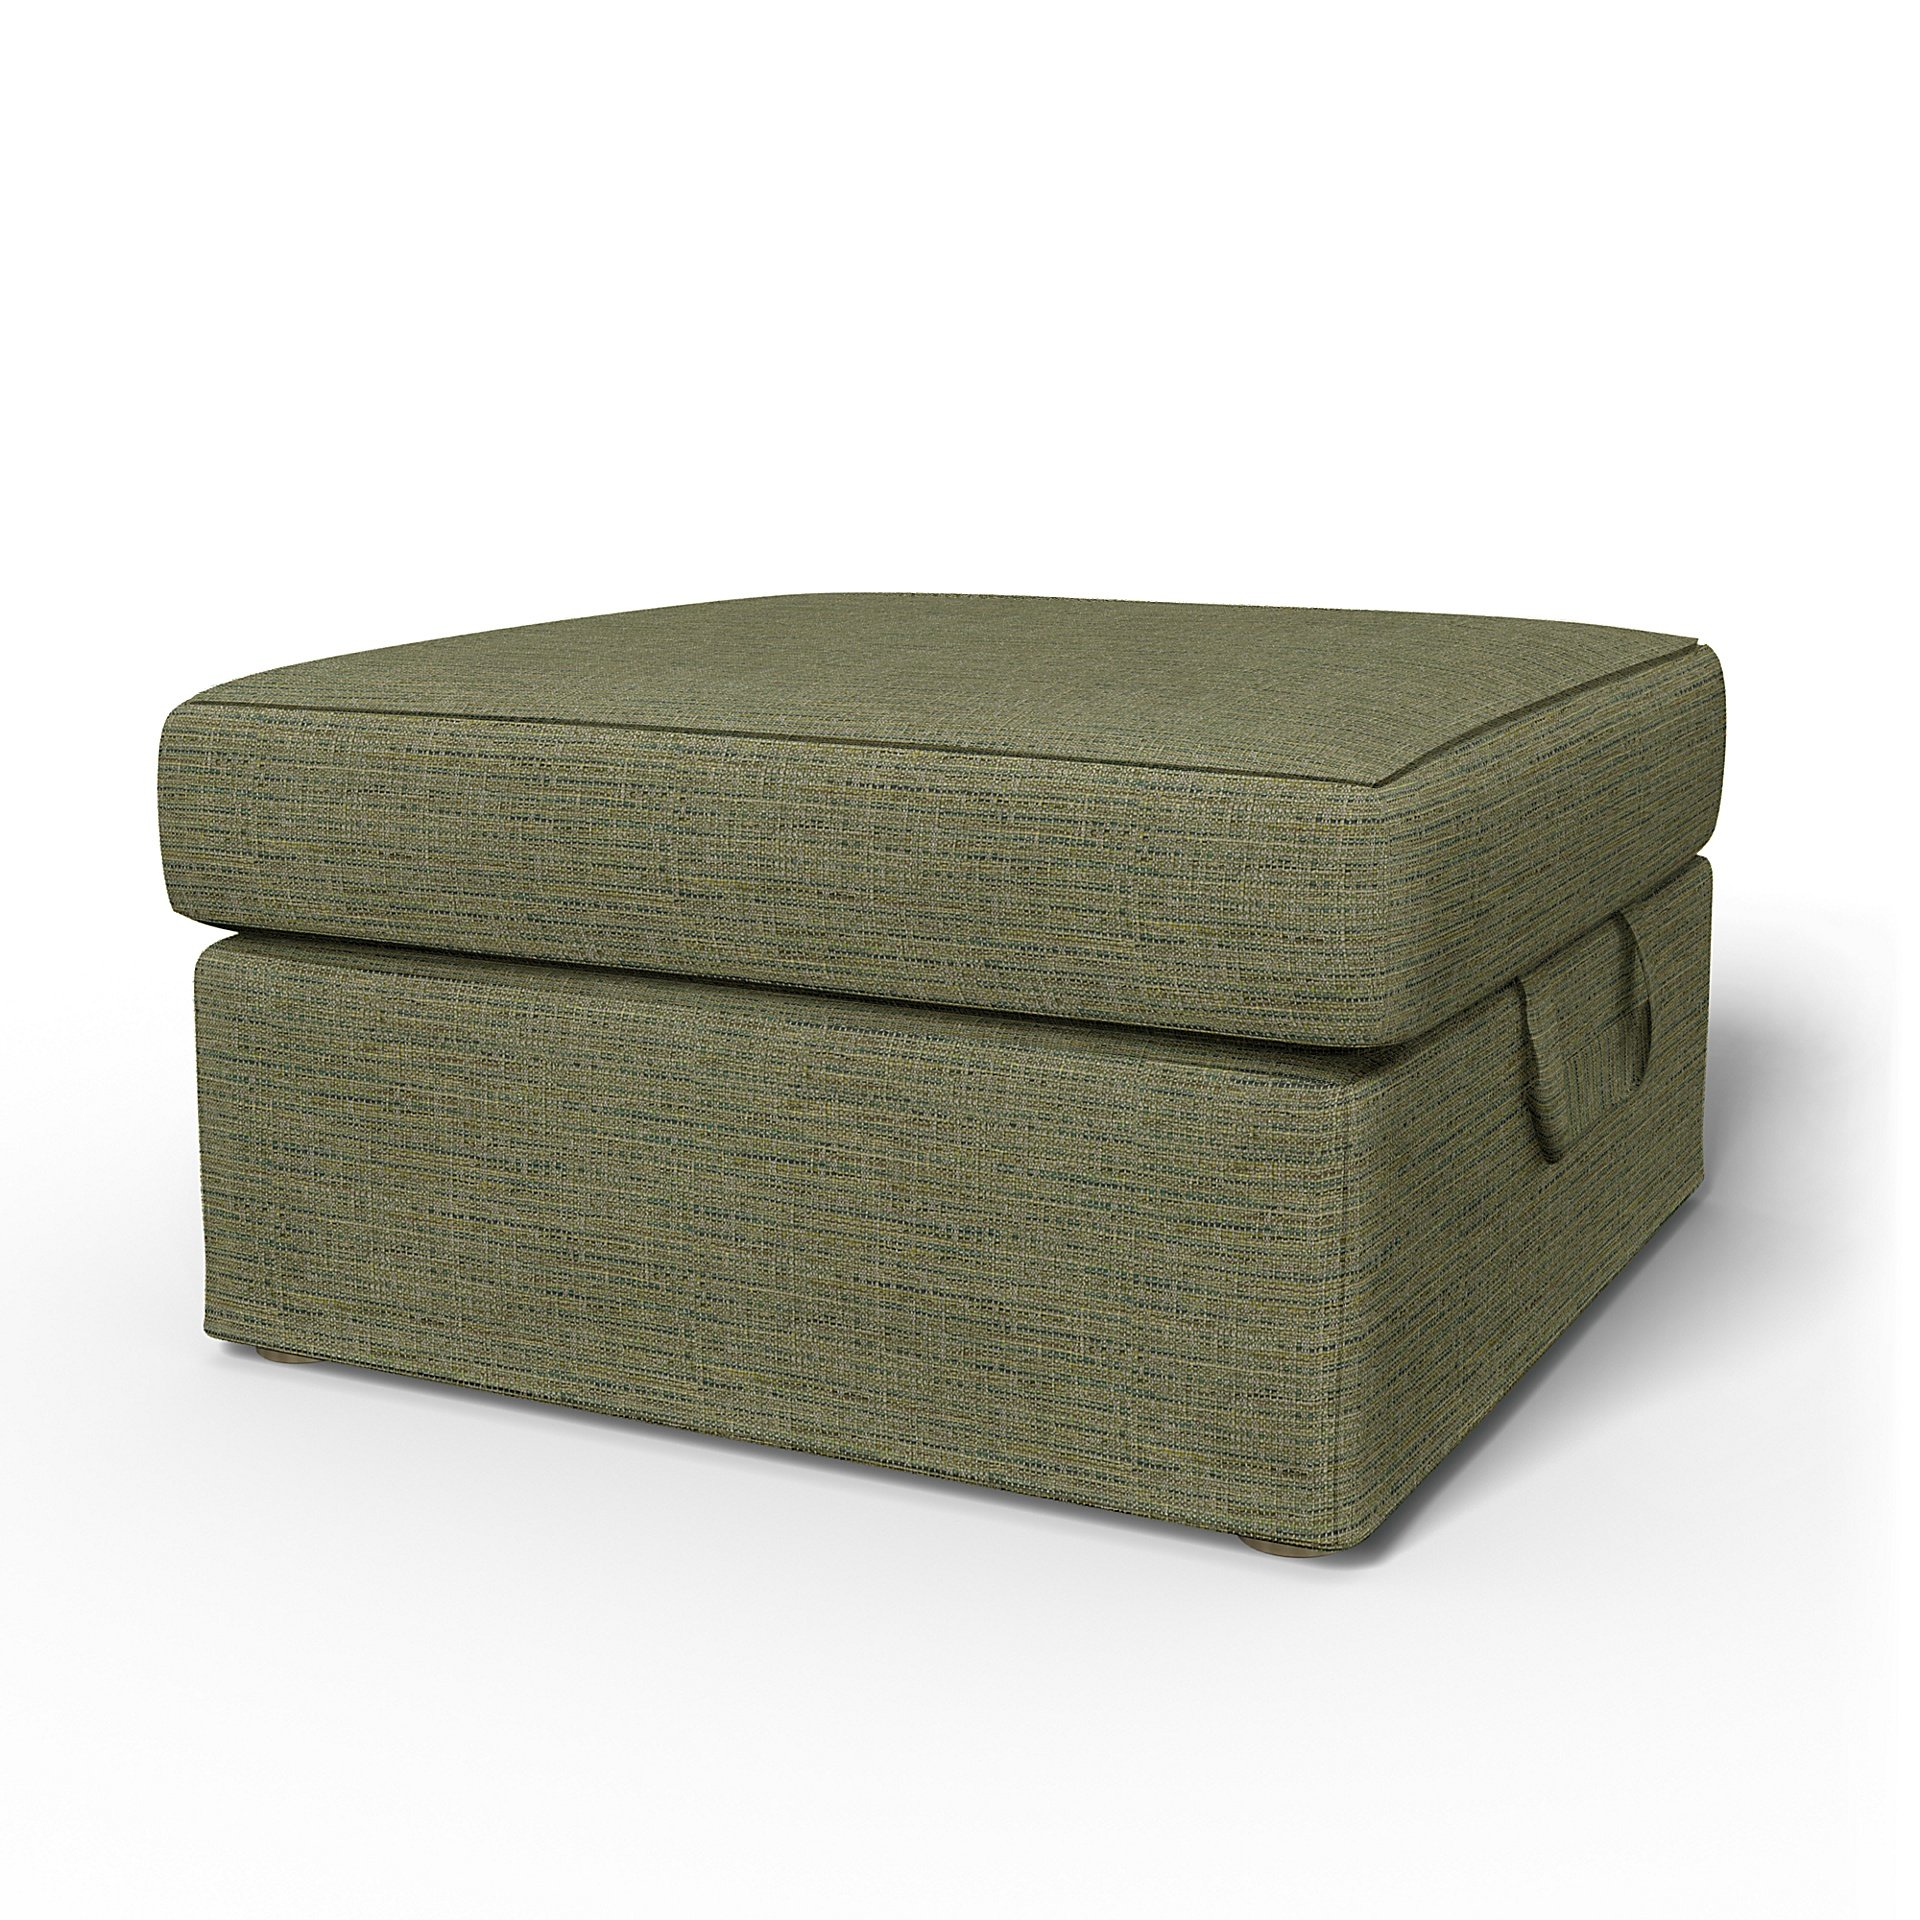 IKEA - Tomelilla Foto Footstool Cover, Meadow Green, Boucle & Texture - Bemz